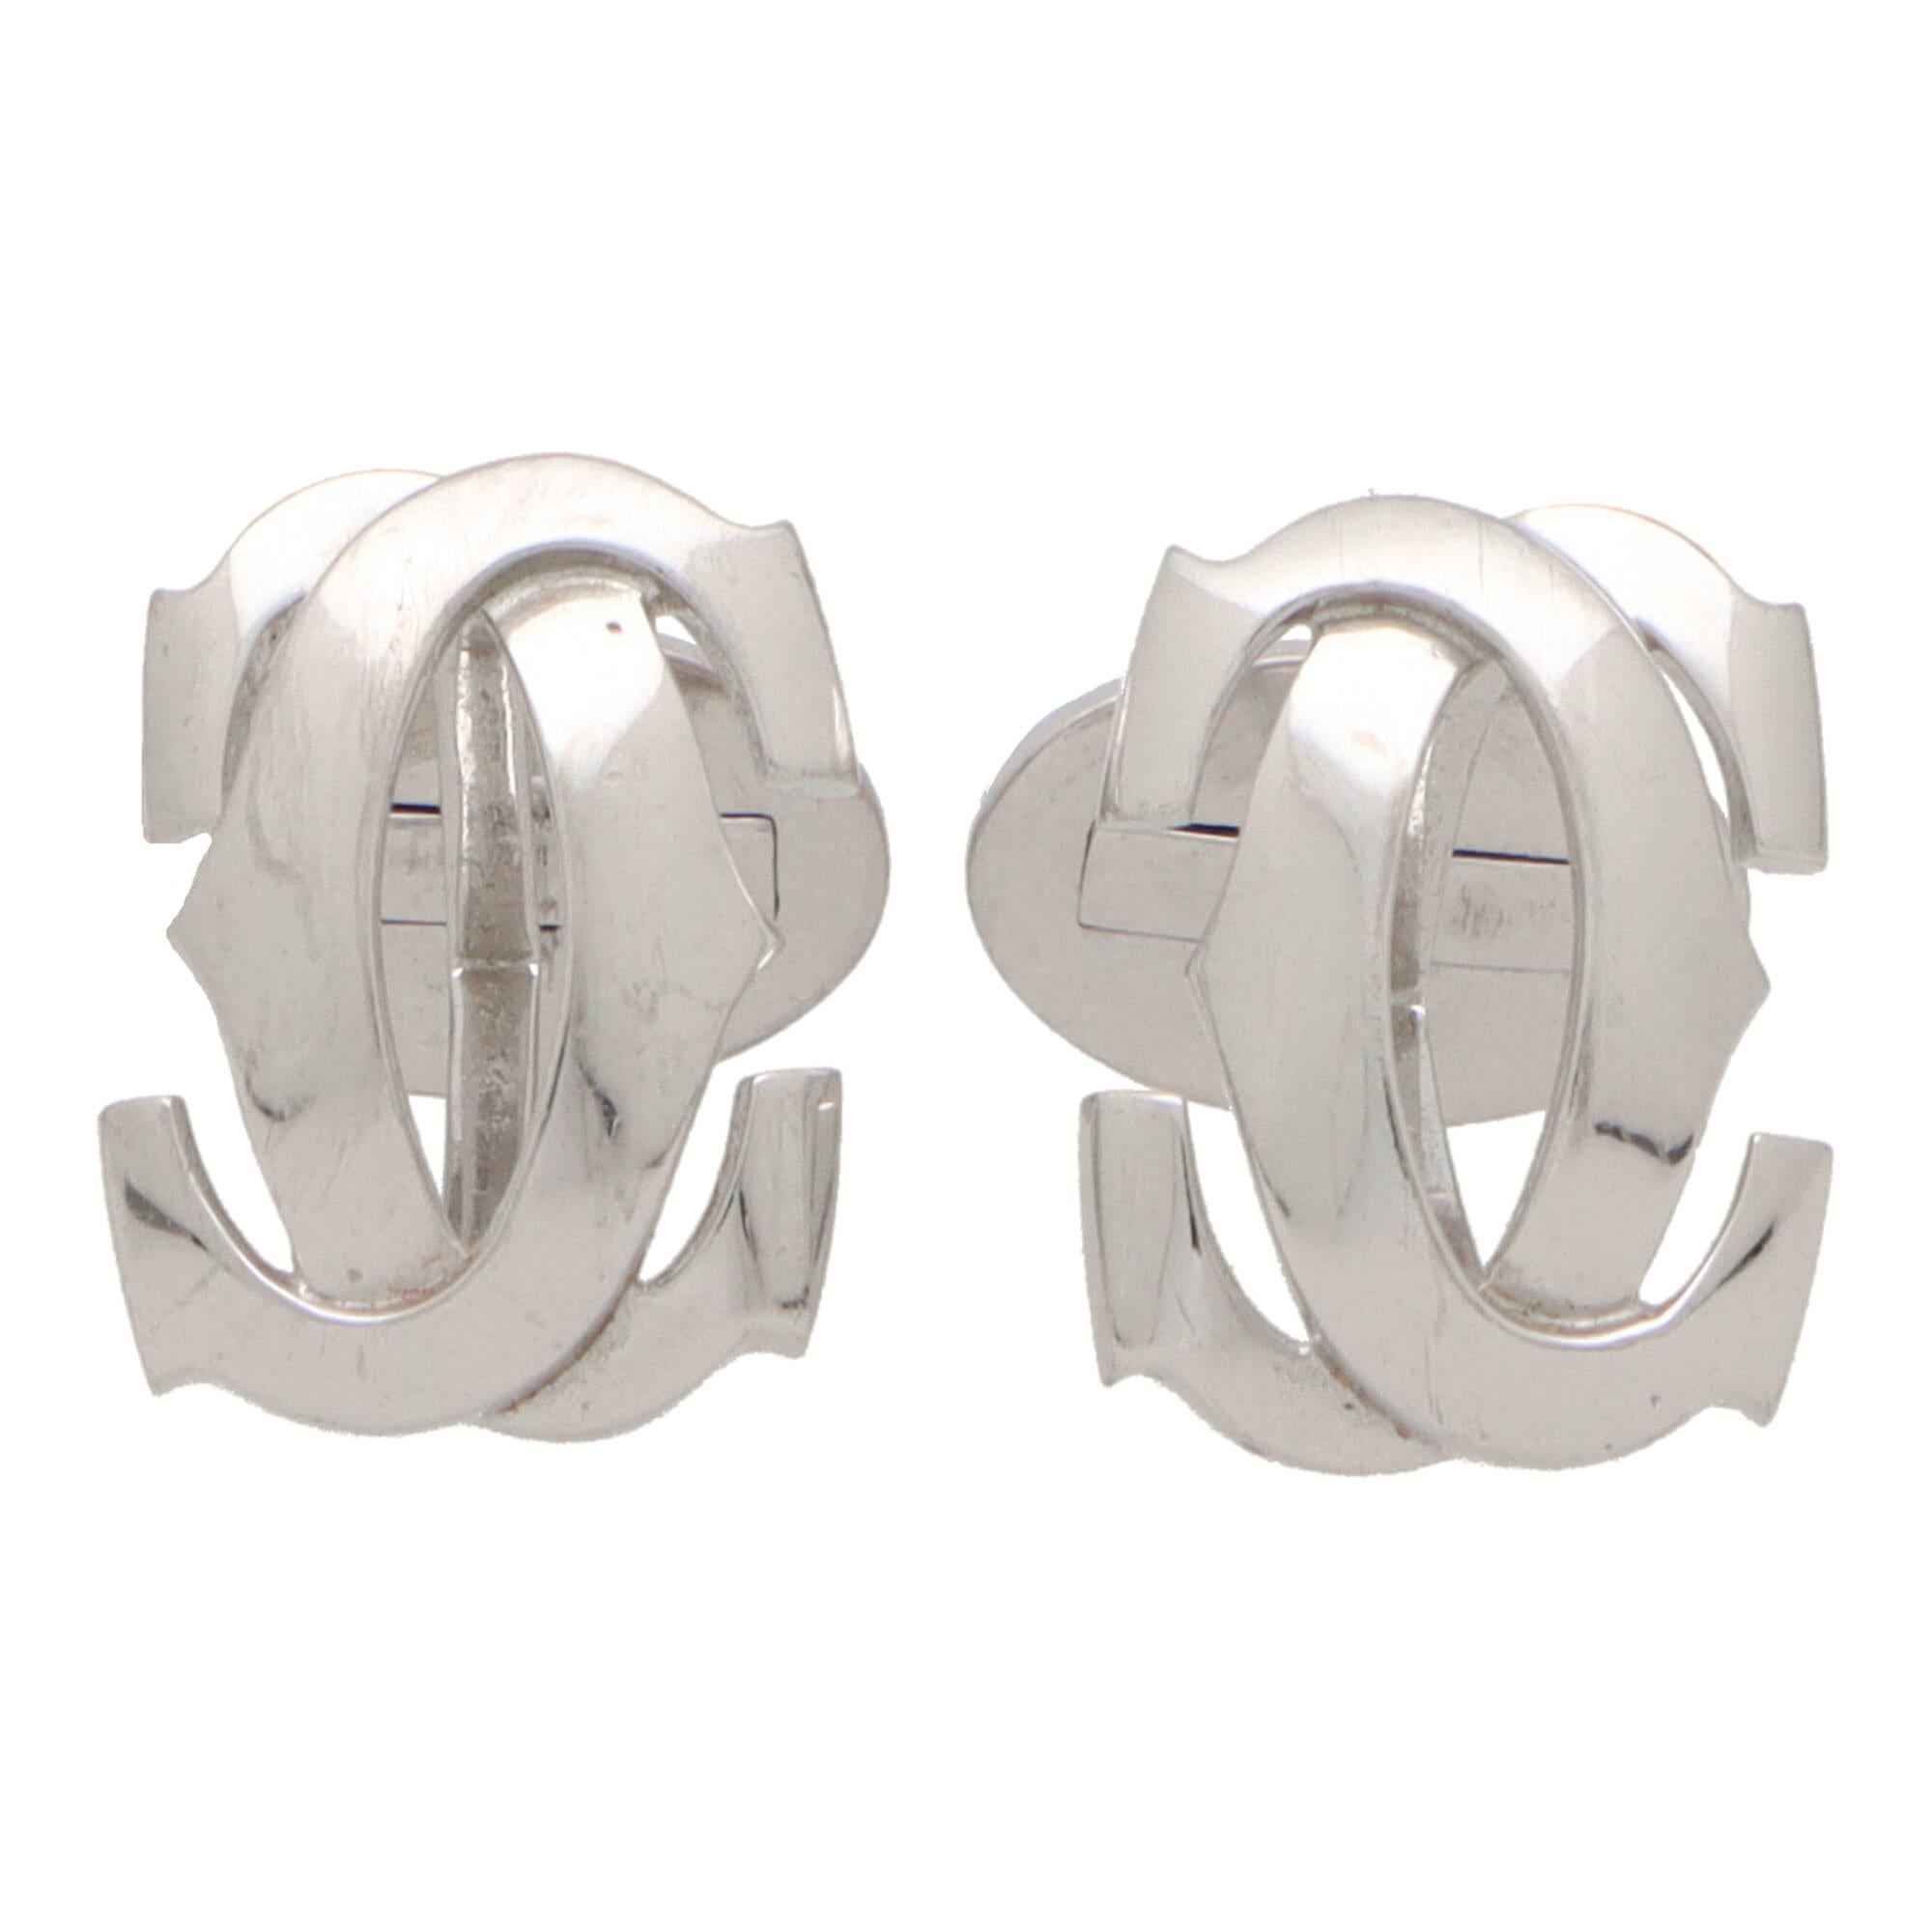 A unique pair of vintage Cartier ‘Penelope’ logo swivel back cufflinks set in 18k white gold.

From the now discontinued ‘Penelope’ collection, each cufflink is composed of the iconic Cartier double C logo motif. The cufflinks are secured with a